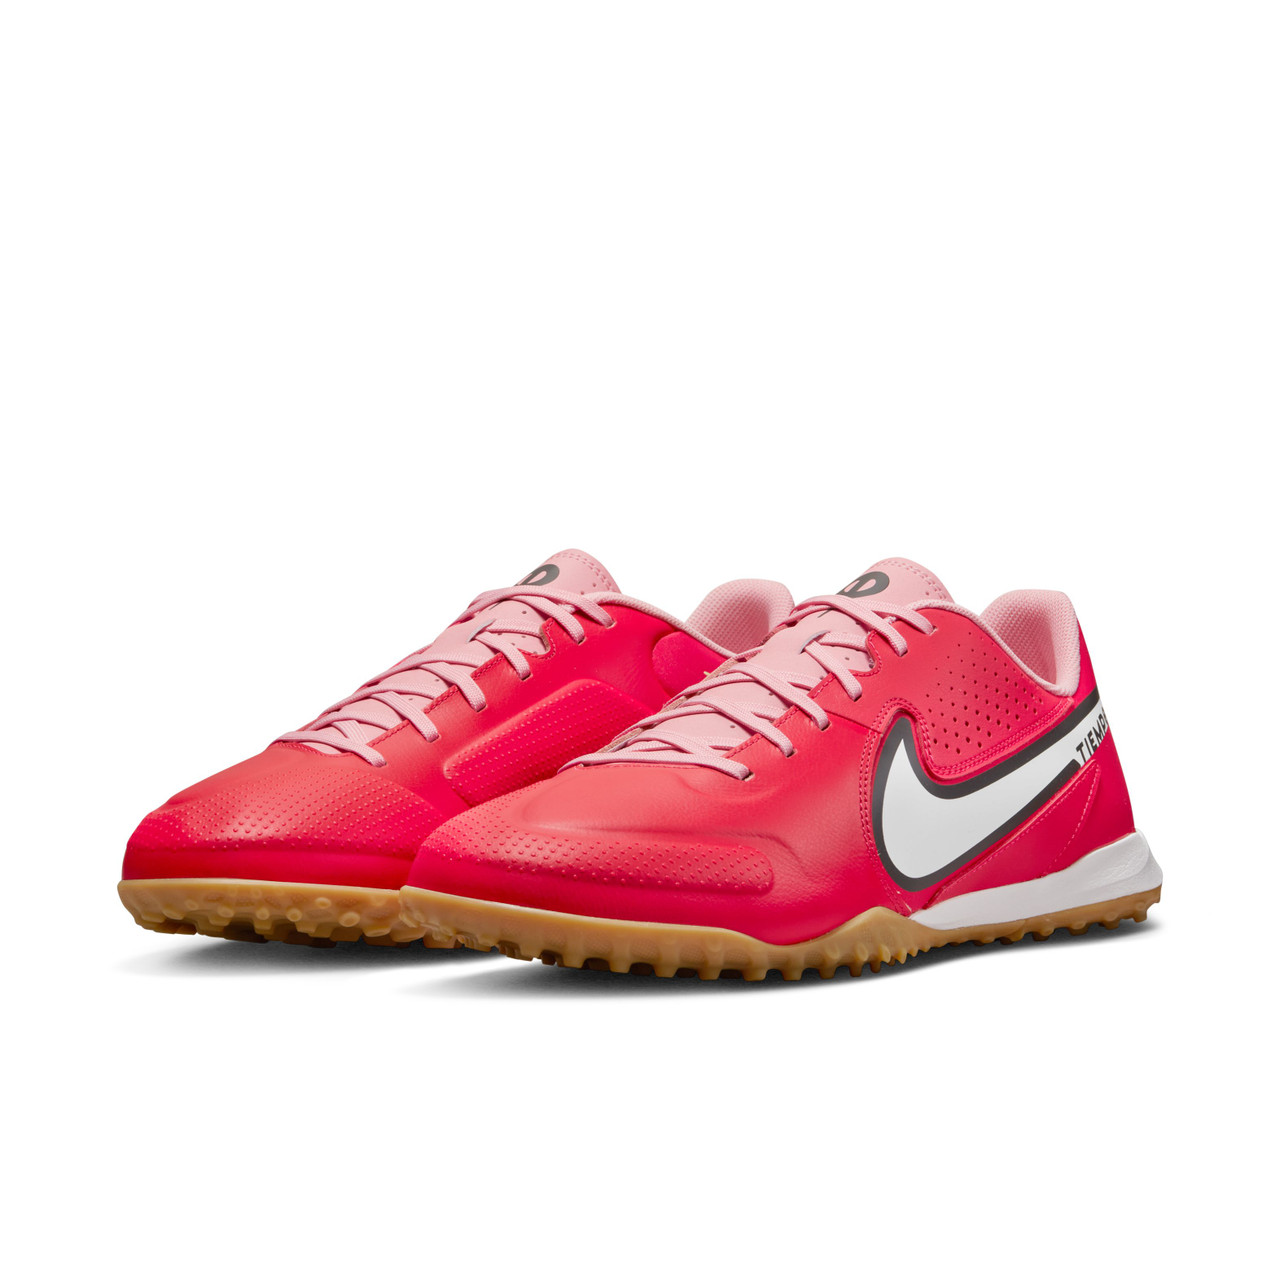 Gran roble plan accesorios Nike Tiempo Legend 9 Academy Turf Soccer Shoe 618-Red-White - Chicago Soccer